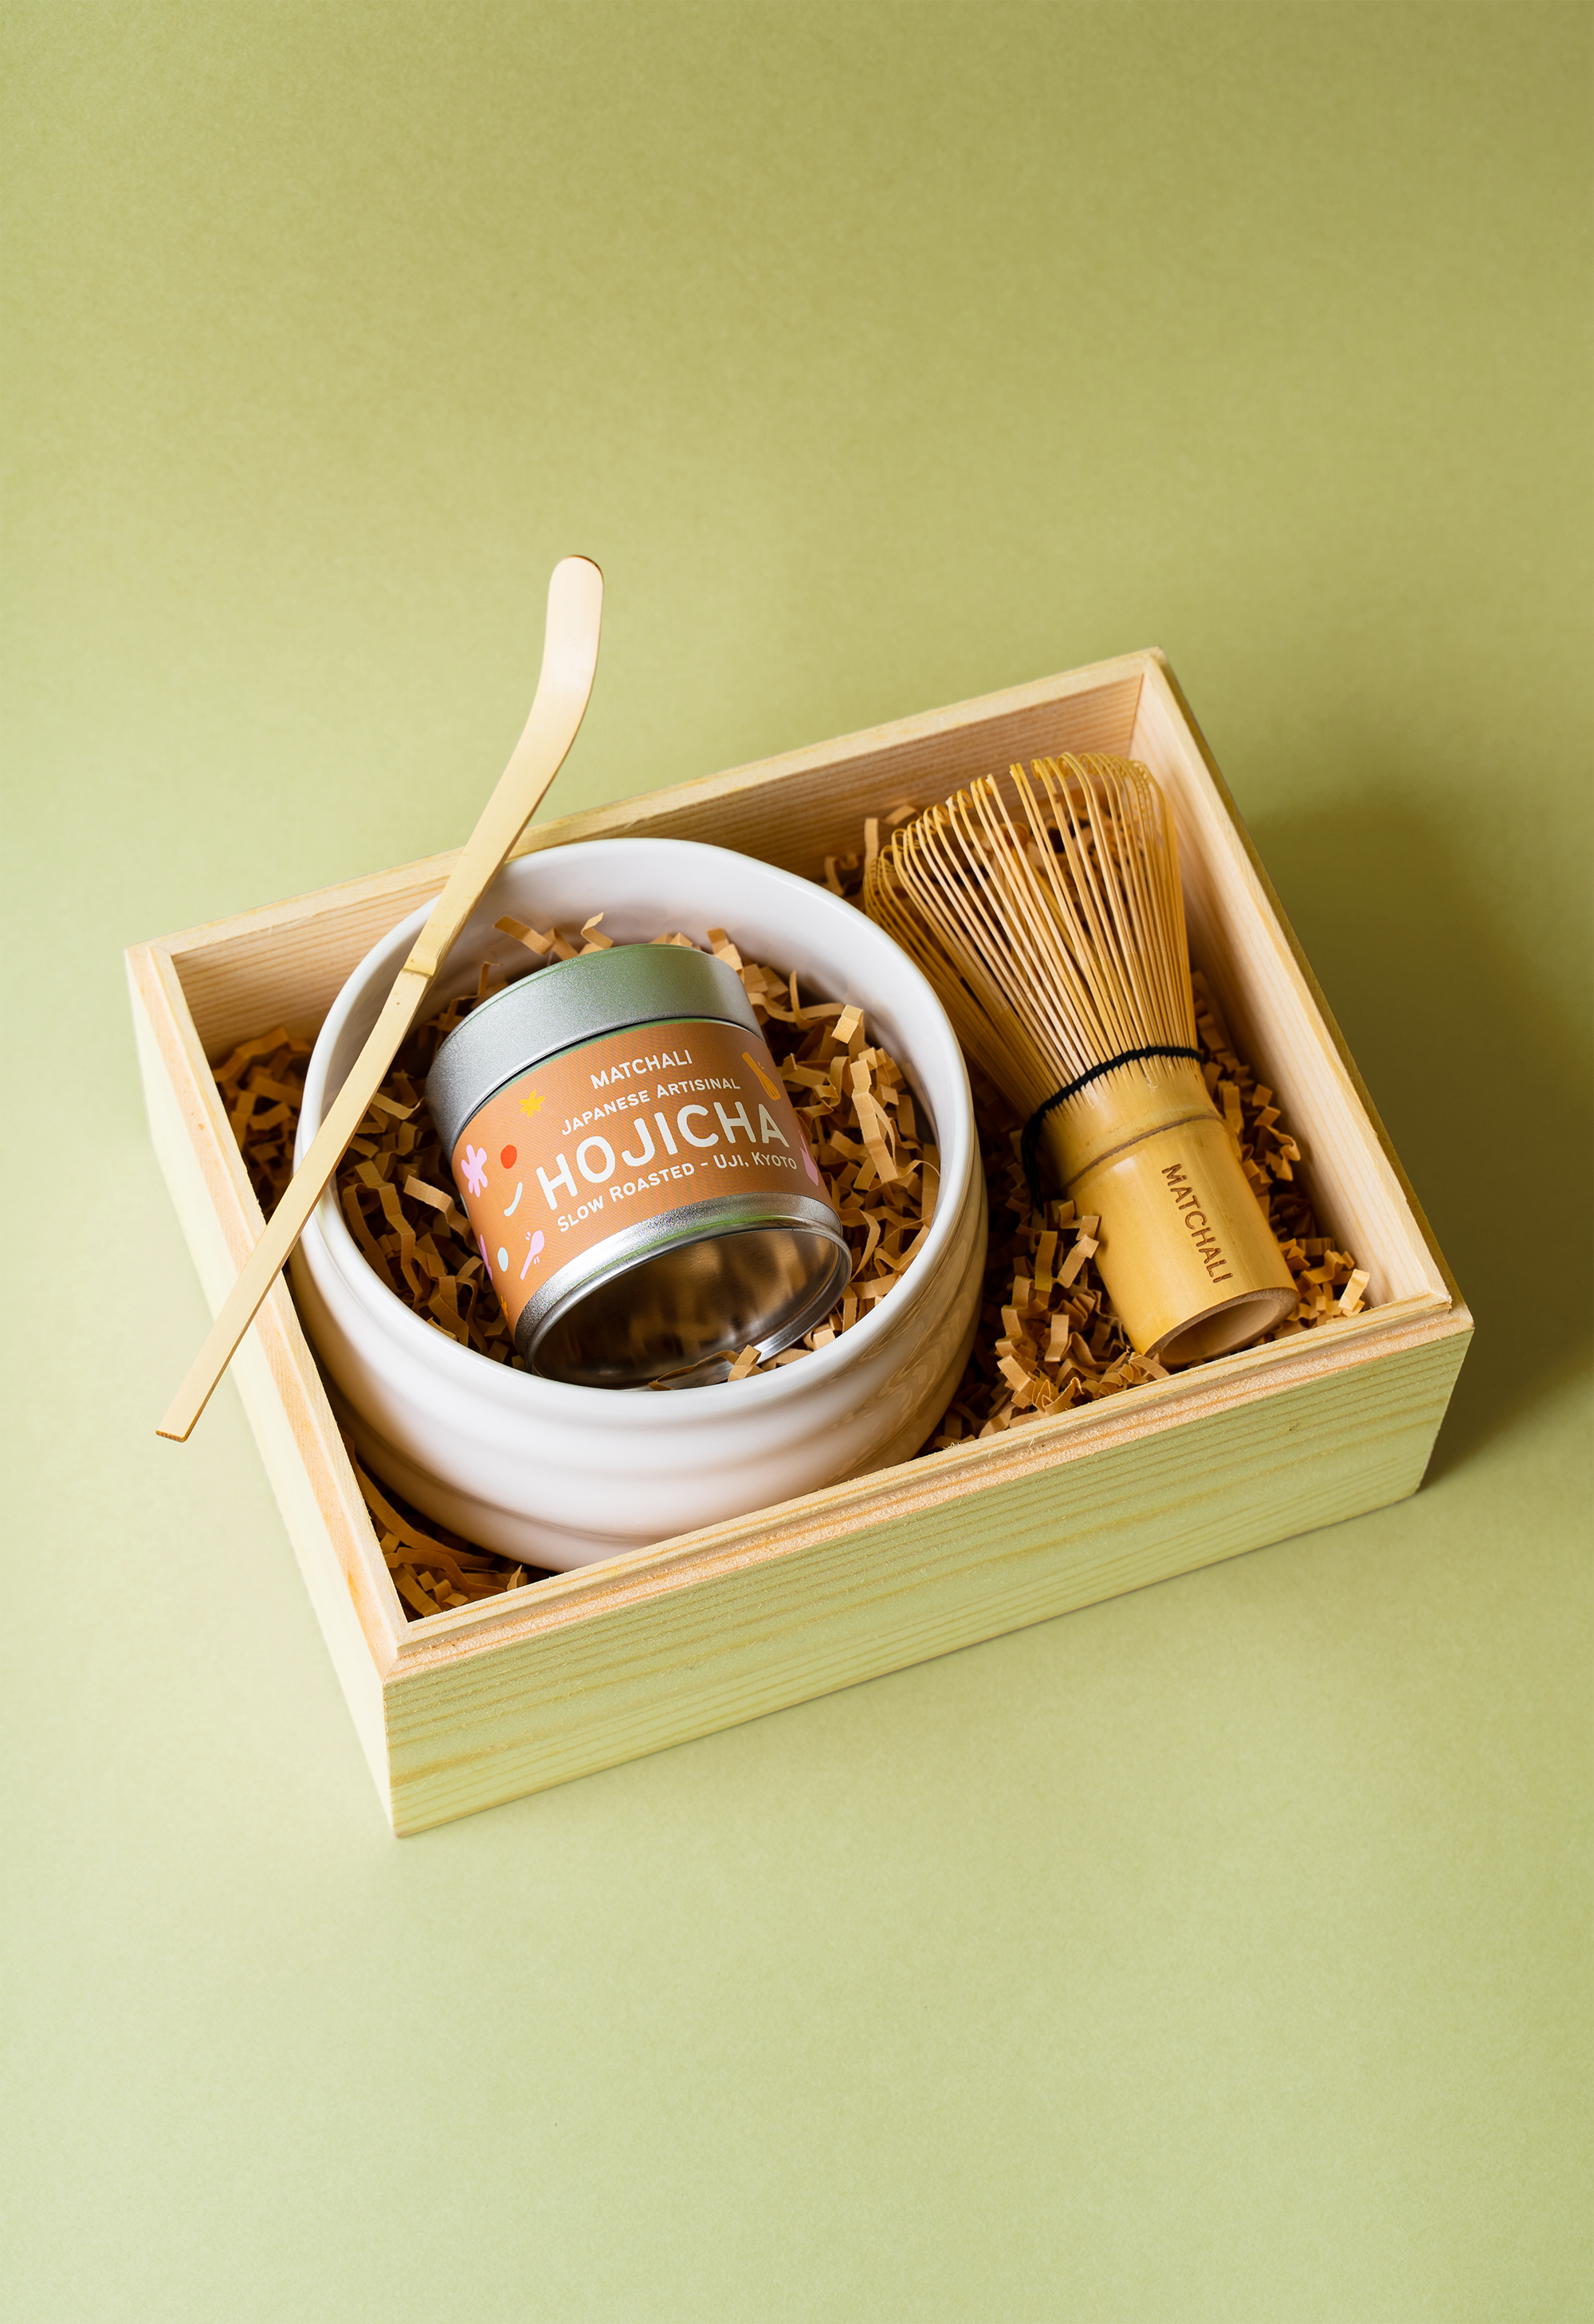 Hojicha powder and a whisk in a box